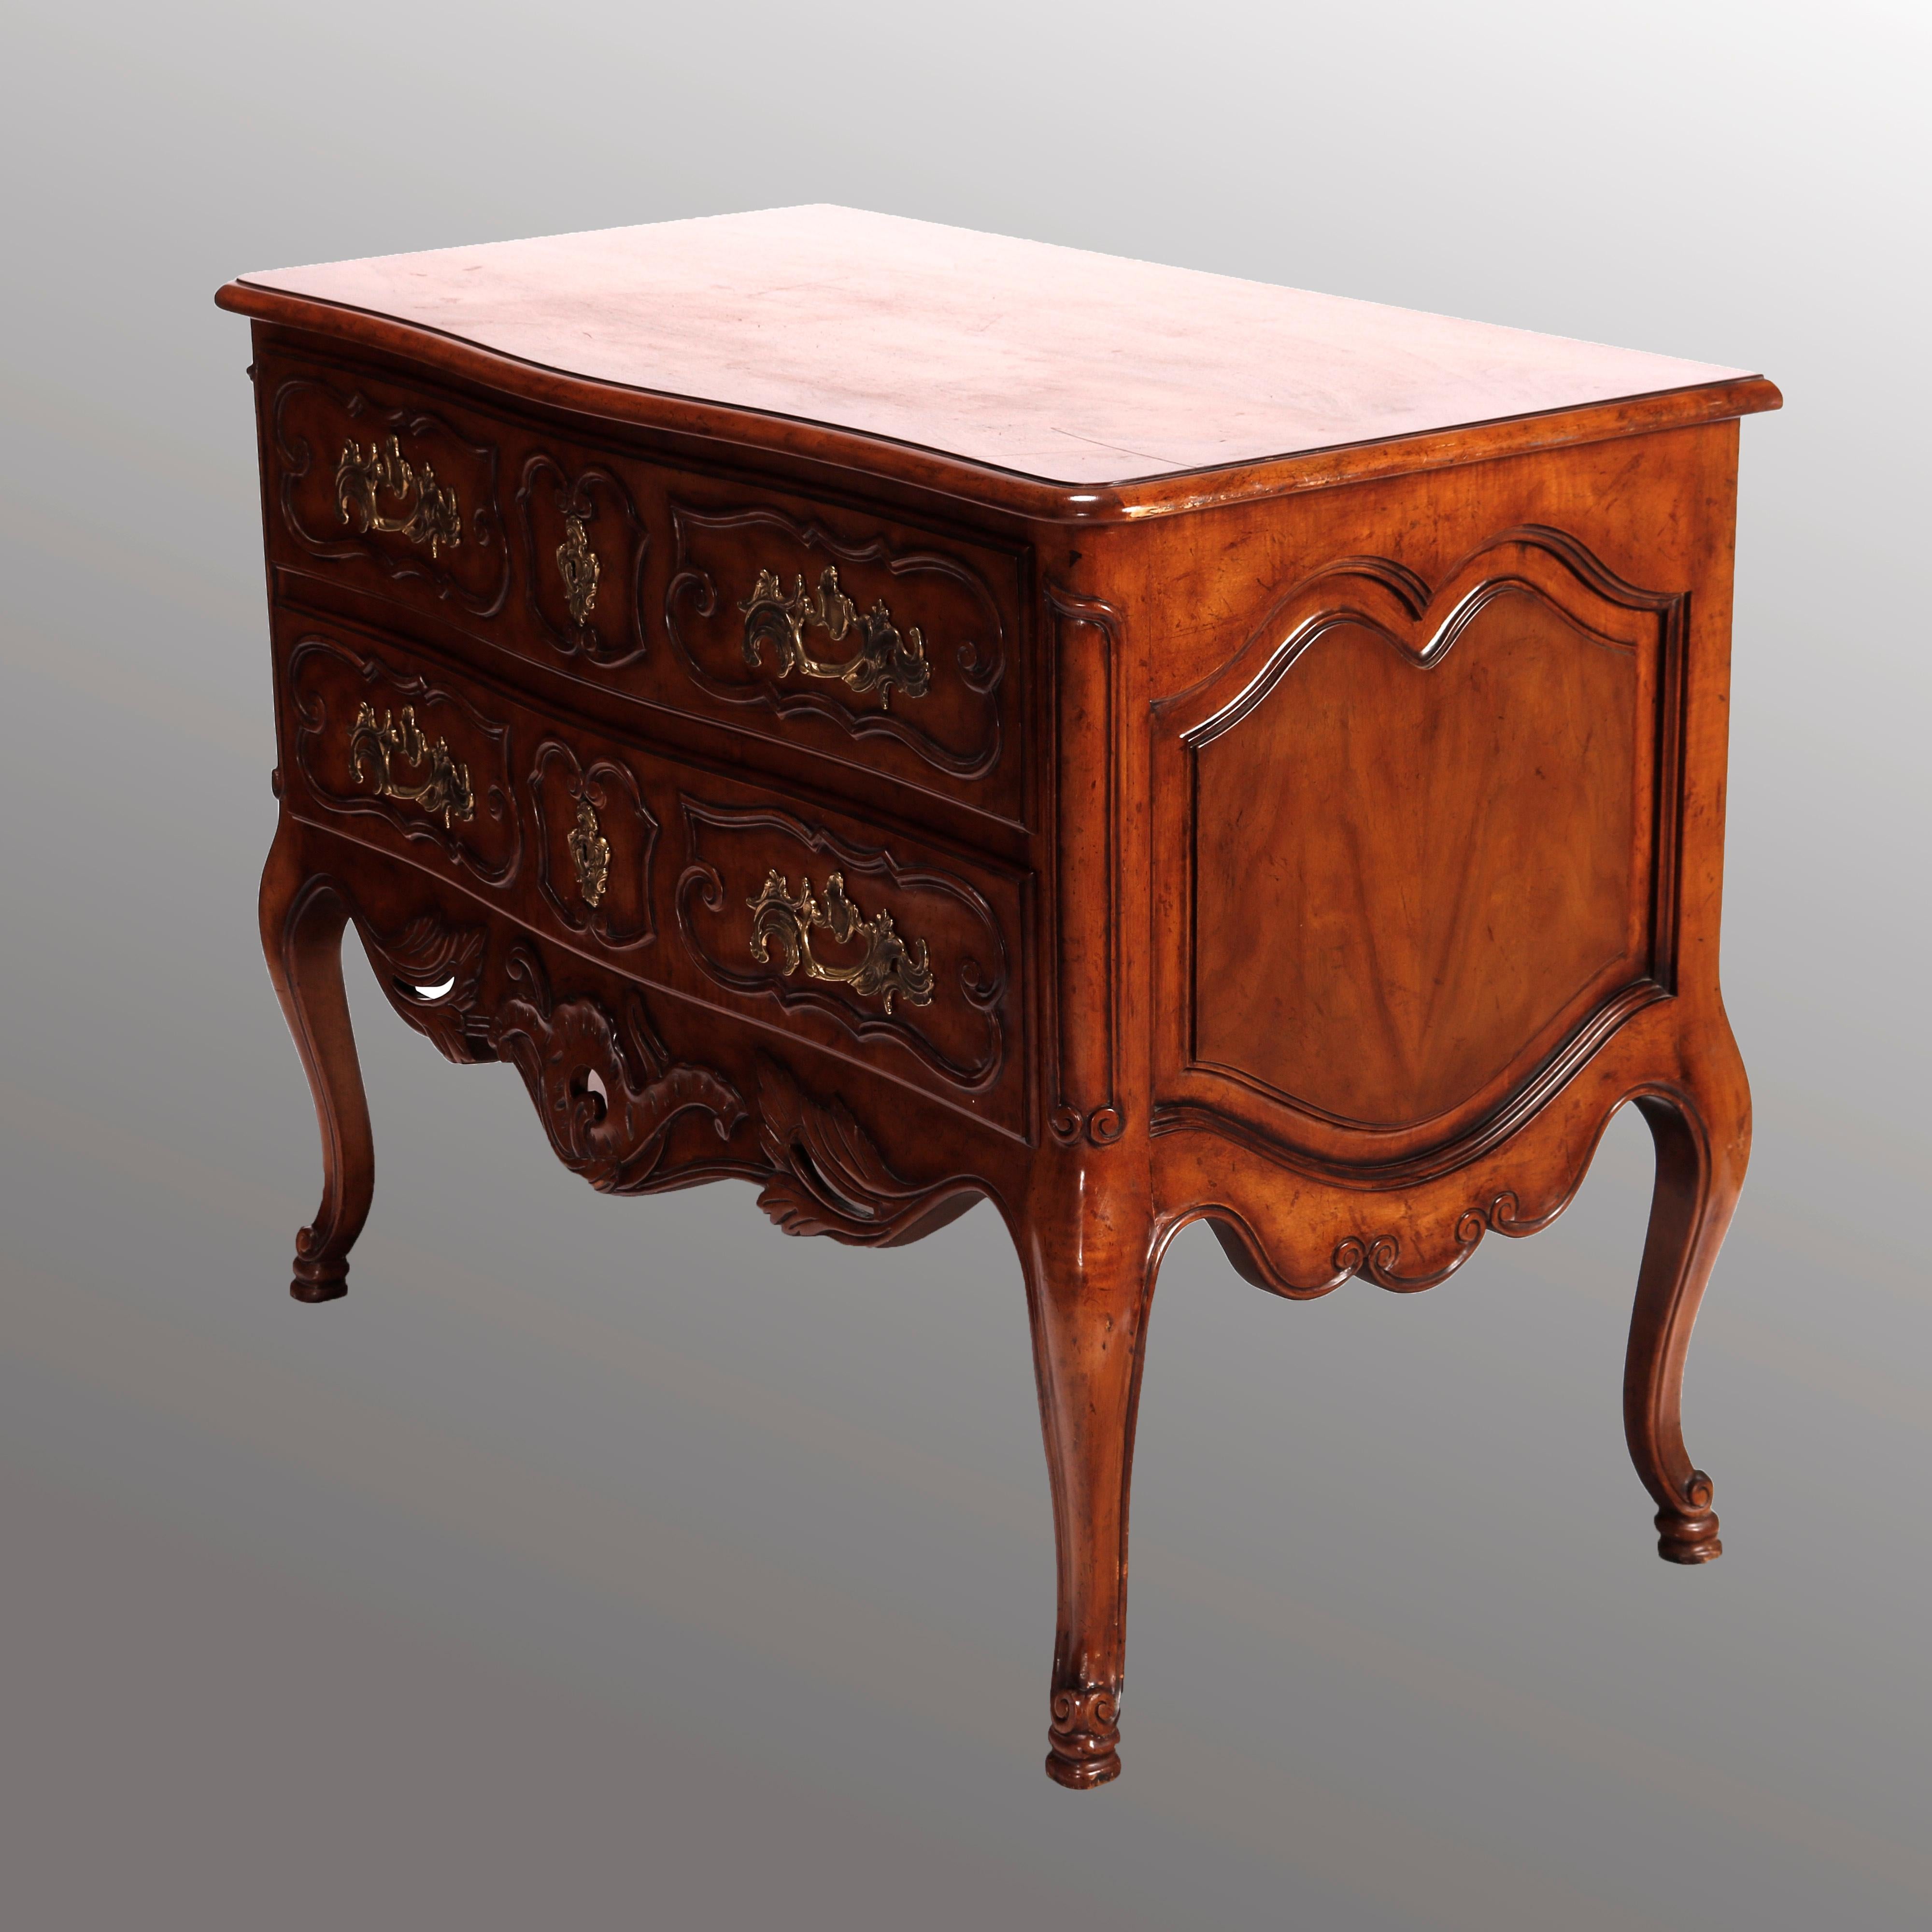 A French Louis XVI style commode by Baker of the McMillen Collection offers walnut construction with shaped and beveled top surmounting case with two drawers and having carved scroll, foliate and gadroon decoration, raised on cabriole legs with